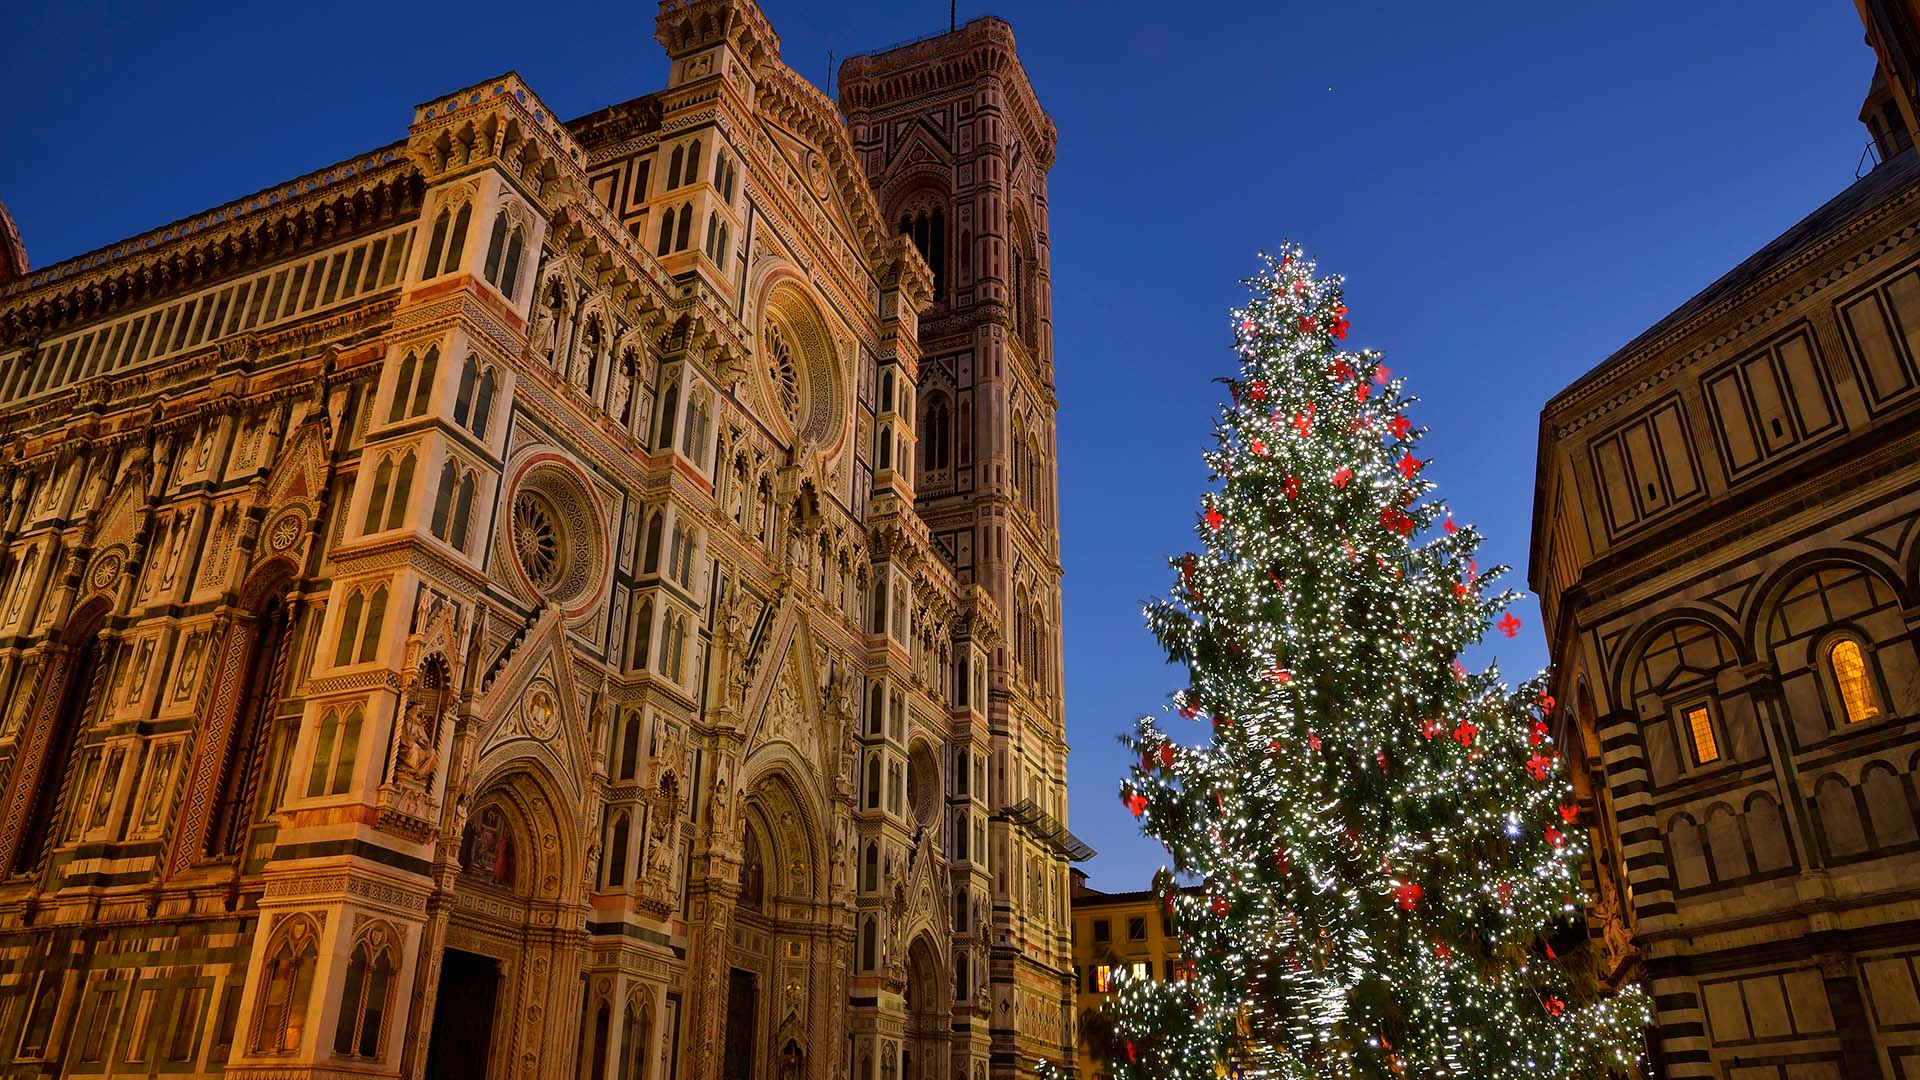 A holiday tree and buildings in Florence, Italy